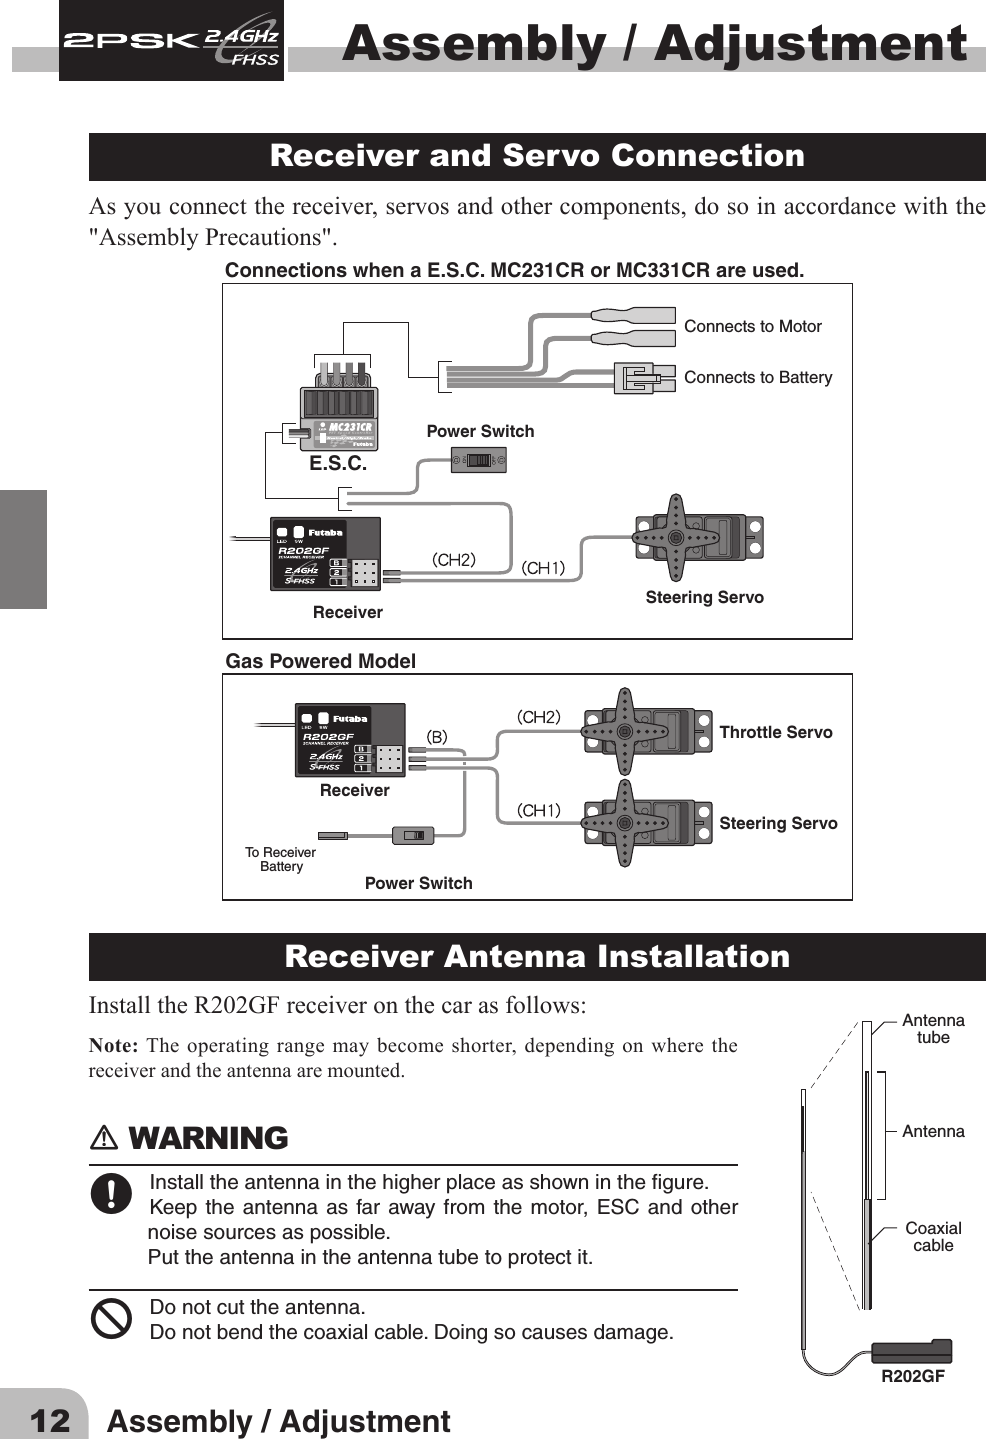 12 Assembly / AdjustmentAssembly / Adjustment Receiver and Servo Connection As you connect the receiver, servos and other components, do so in accordance with the &quot;Assembly Precautions&quot;. Connections when a E.S.C. MC231CR or MC331CR are used.Steering ServoThrottle ServoReceiverReceiverPower SwitchTo Receiver    BatterySteering ServoE.S.C.Power SwitchConnects to MotorConnects to BatteryGas Powered ModelReceiver Antenna InstallationInstalltheR202GFreceiveronthecarasfollows:Note: The operating range may become shorter, depending on where the receiver and the antenna are mounted.󾛽WARNING 󾛹Installtheantennainthehigherplaceasshowninthegure.Keepthe antennaas farawayfrom the motor,ESC andothernoisesourcesaspossible.Puttheantennaintheantennatubetoprotectit.󾛻Donotcuttheantenna.Donotbendthecoaxialcable.Doingsocausesdamage.AntennatubeAntennaCoaxialcableR202GF